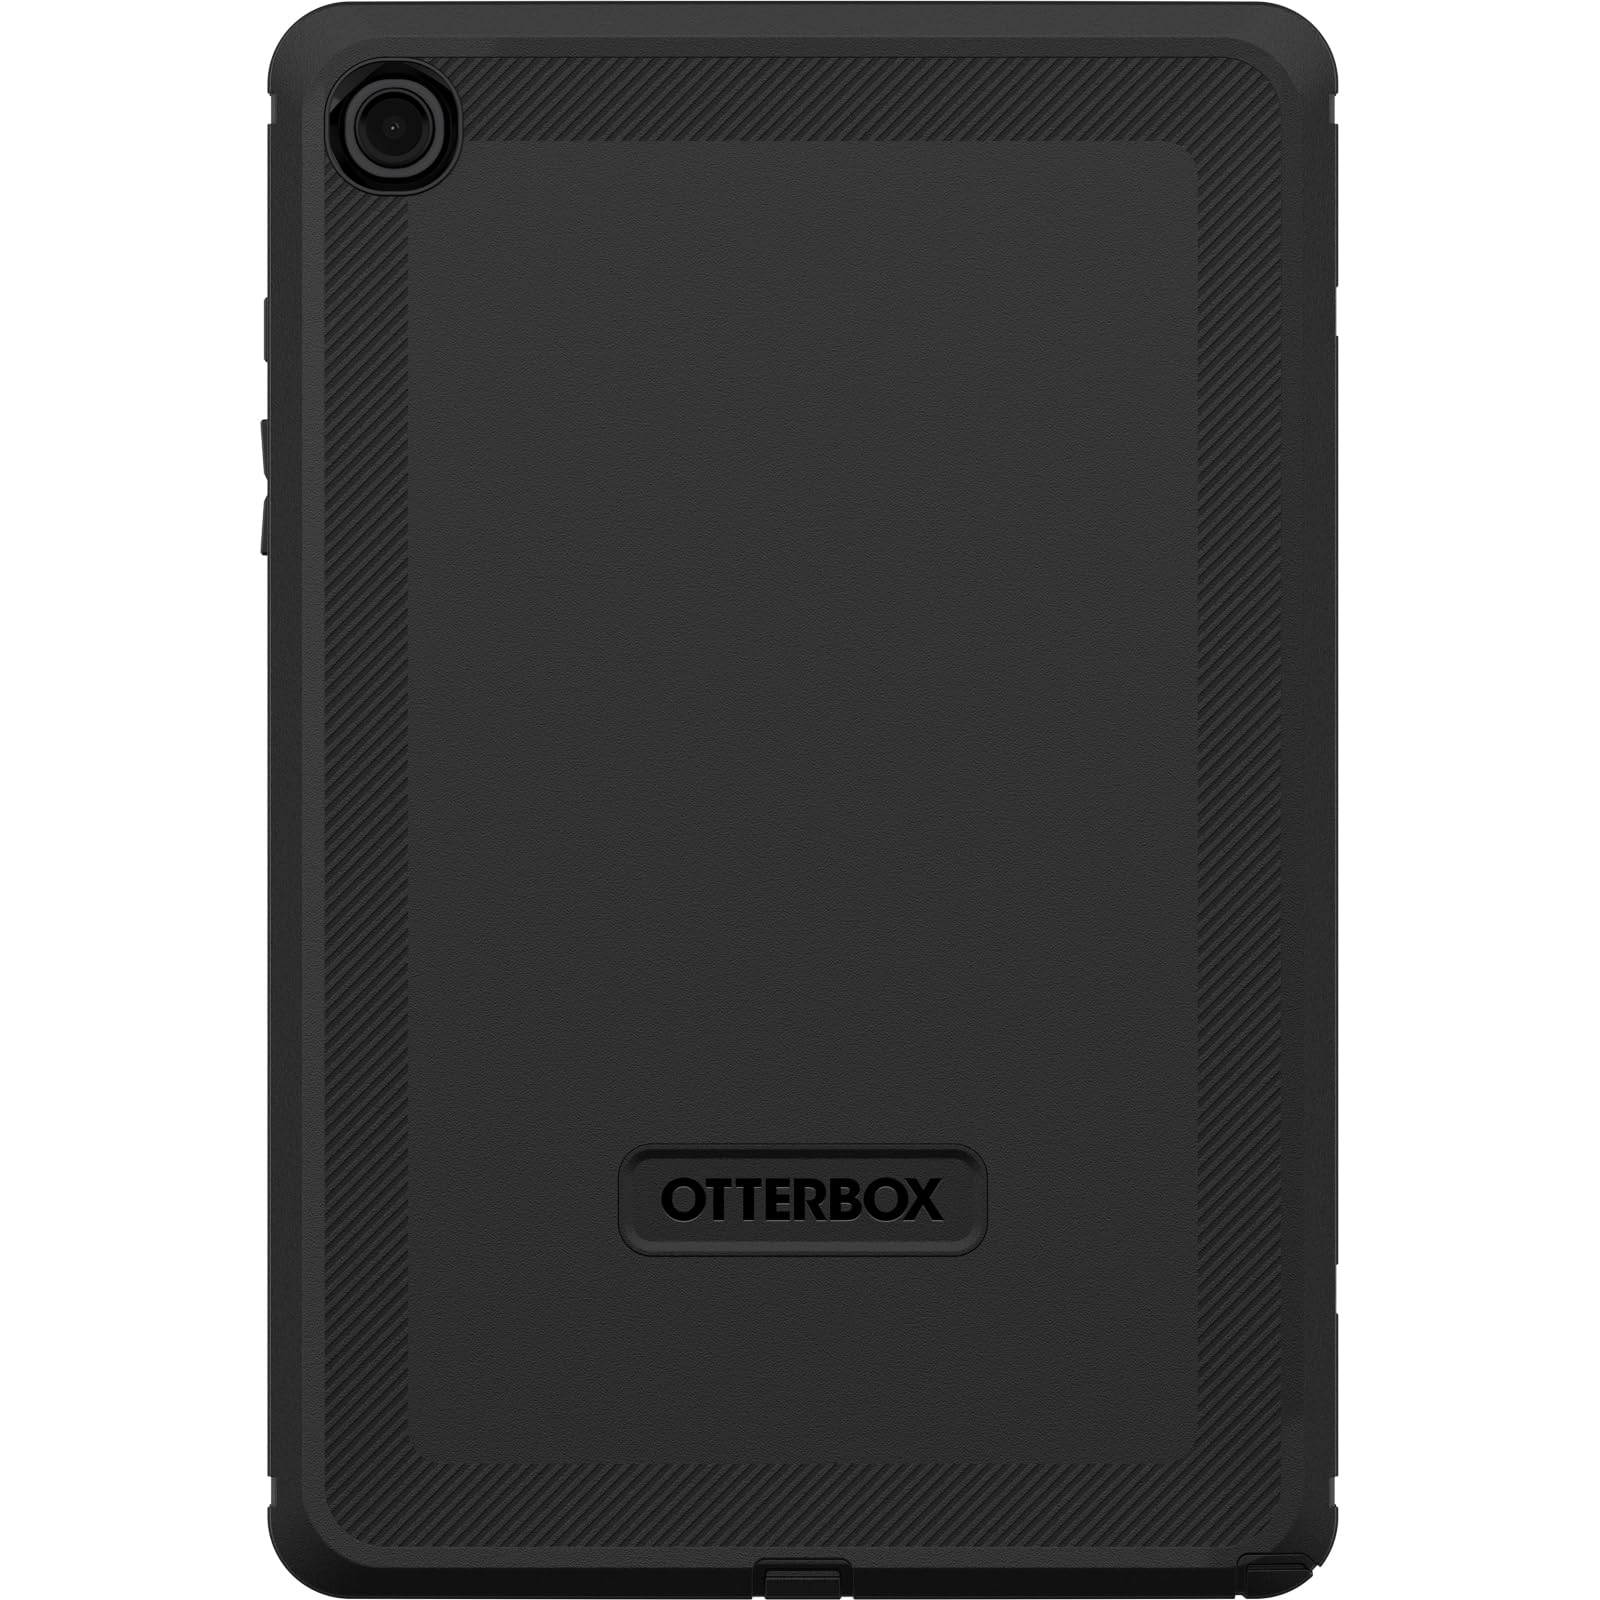 OtterBox Defender Series case for Samsung Galaxy Tab A9+ - Black (Single Unit Ships in polybag, Ideal for Business customers)